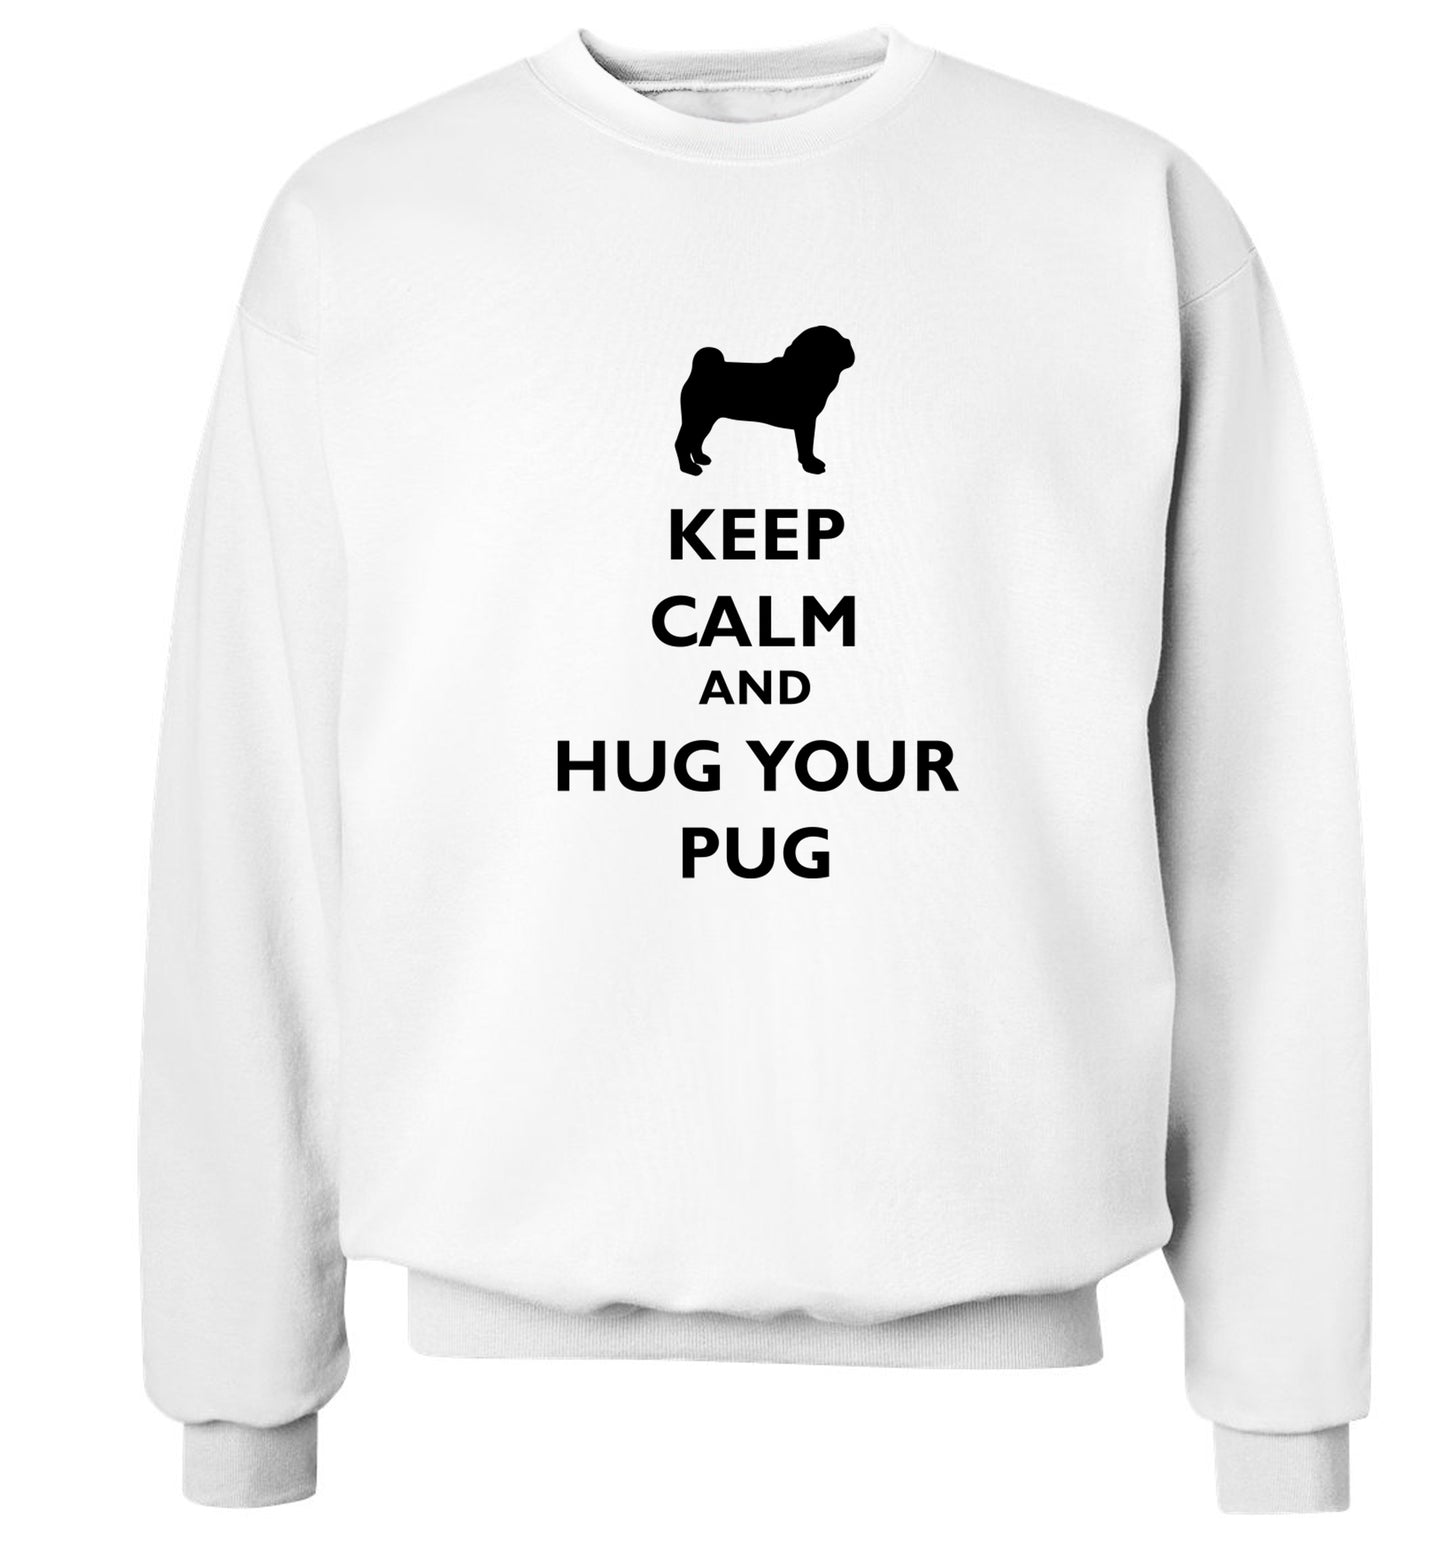 Keep calm and hug your pug Adult's unisex white Sweater 2XL